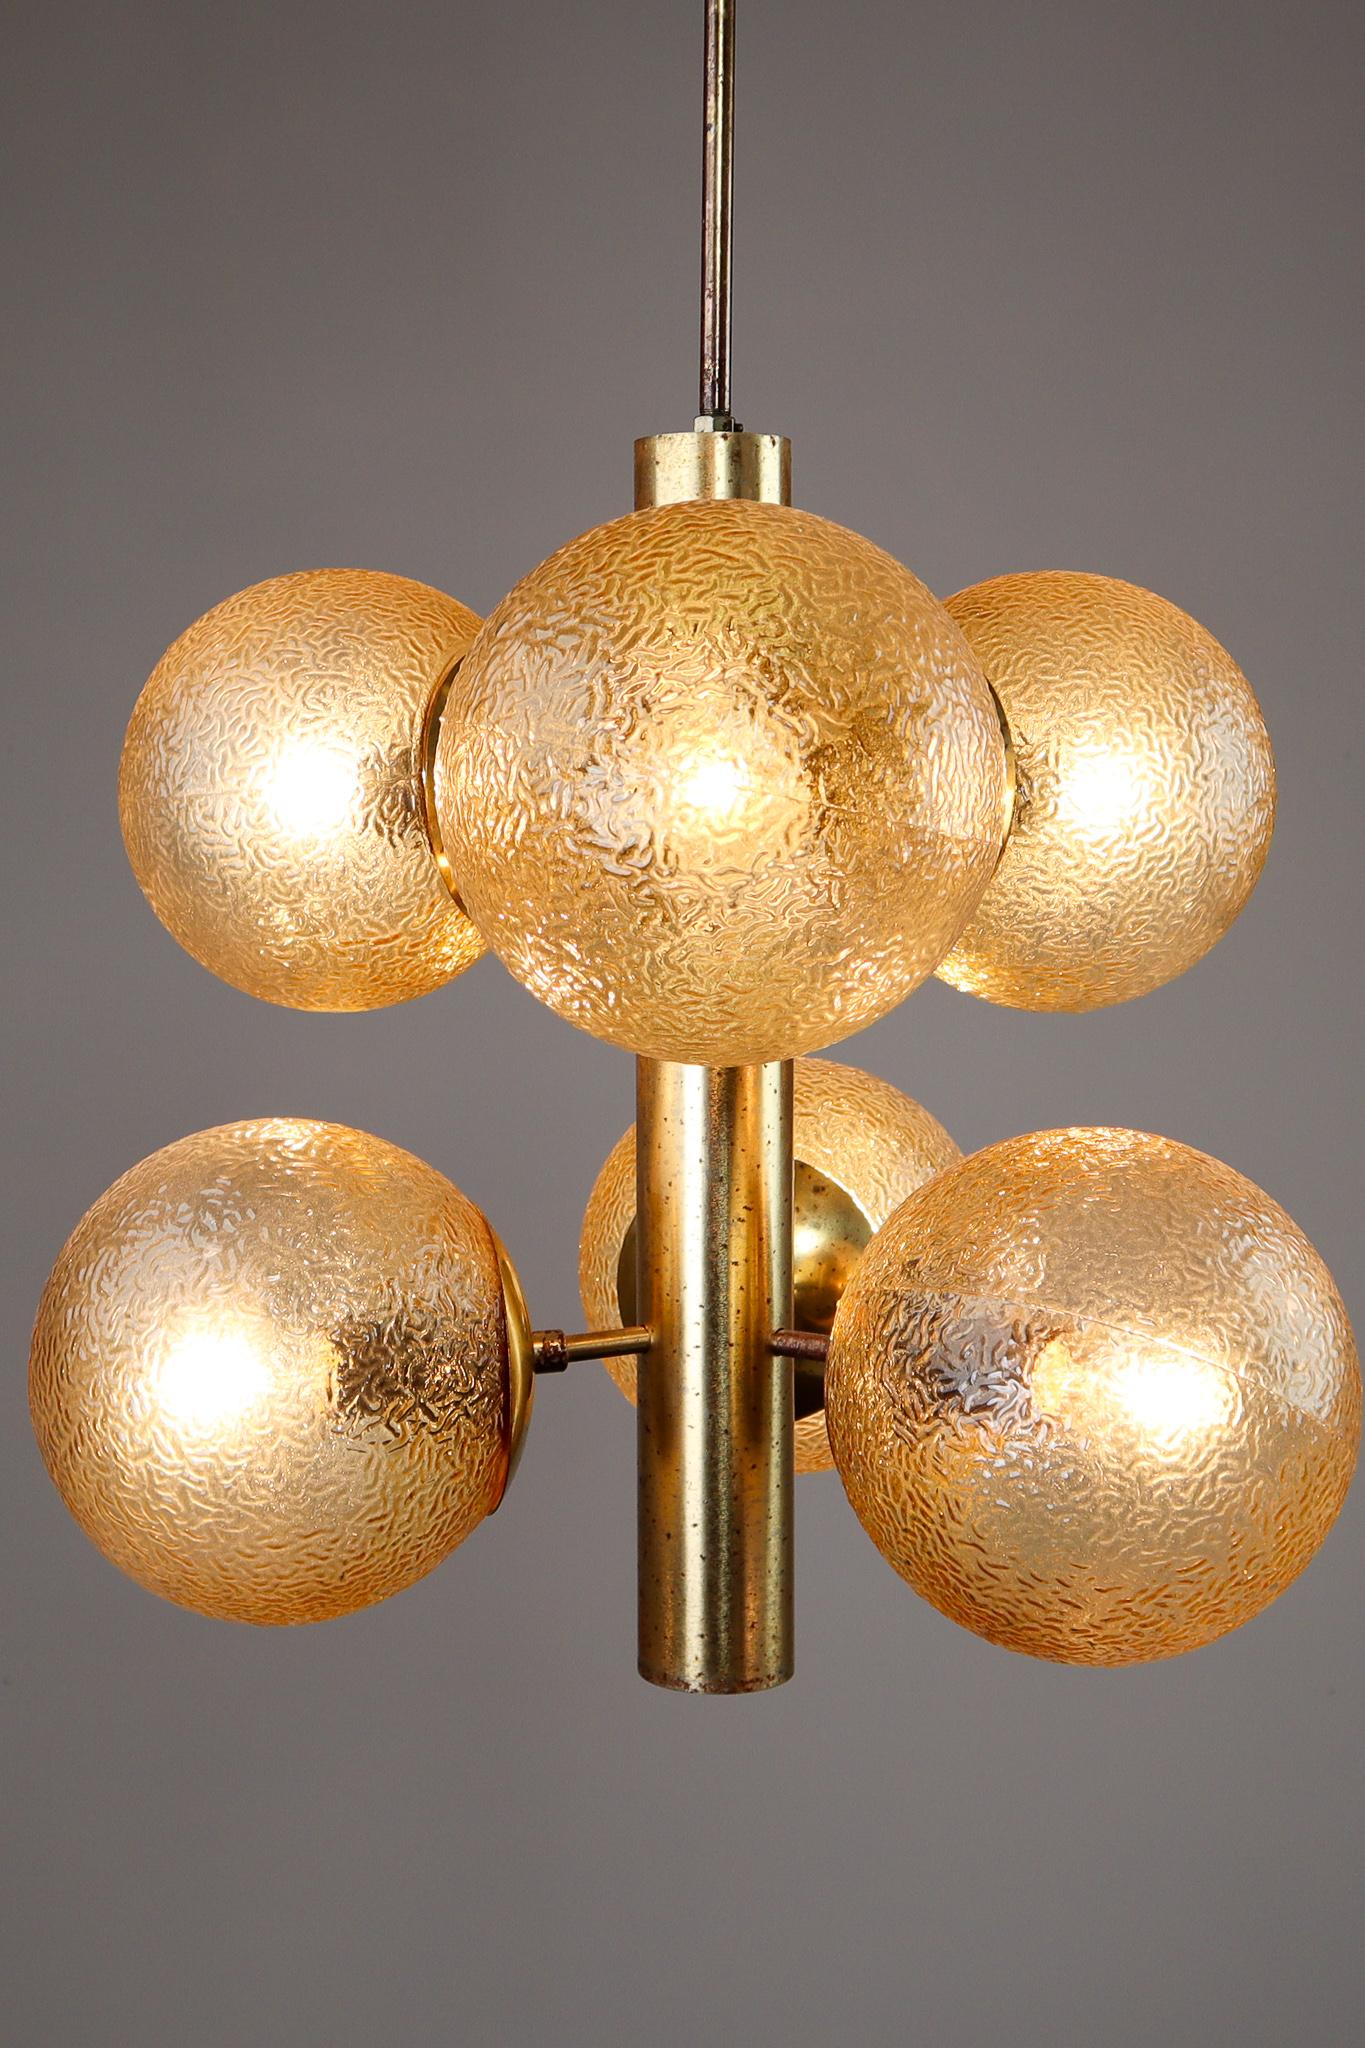 Set of 9 Sputnik chandeliers with 6 handmade glass globes and patinated brass by Kaiser Leuchten, Germany, 1960s.These chandeliers will contribute to a luxurious character of the (hotel-bar) interior. Very good vintage condition without damages.